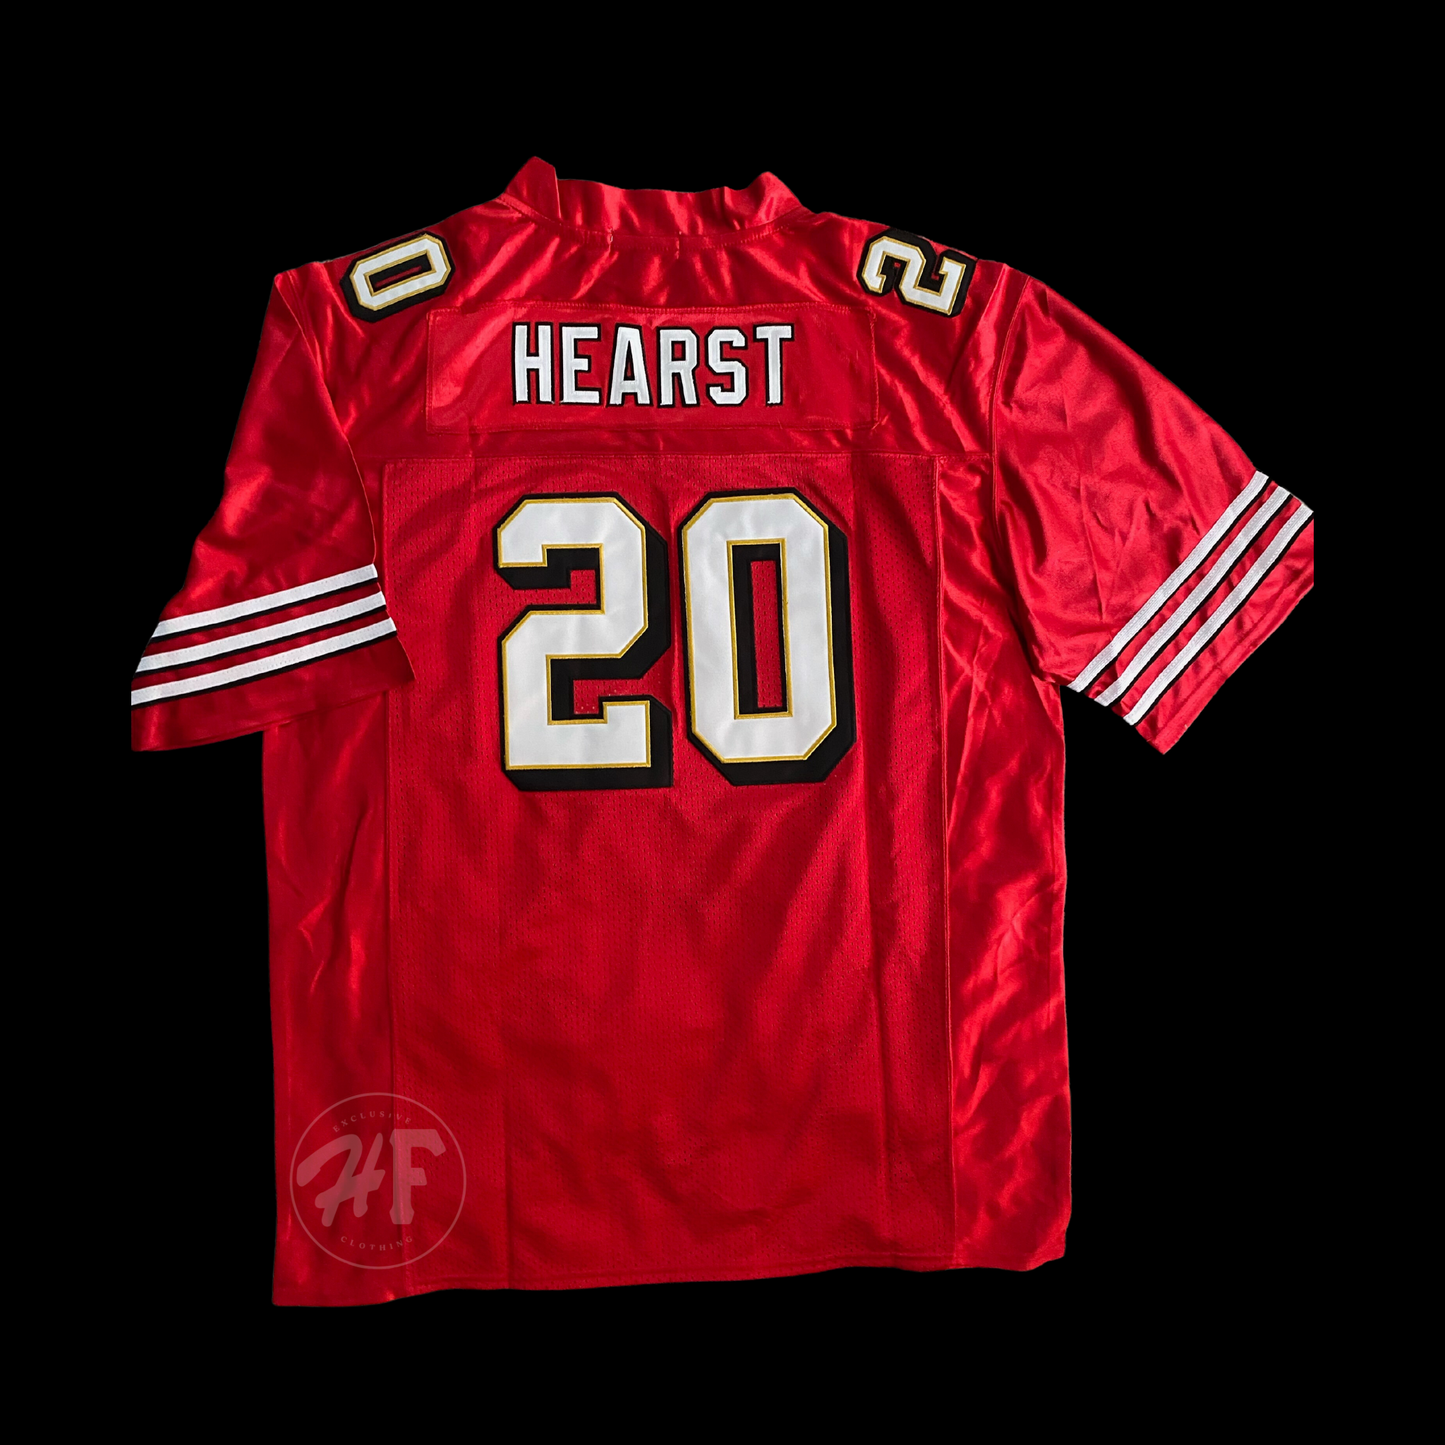 #20 Hearst Stitched Men’s 49ers jersey